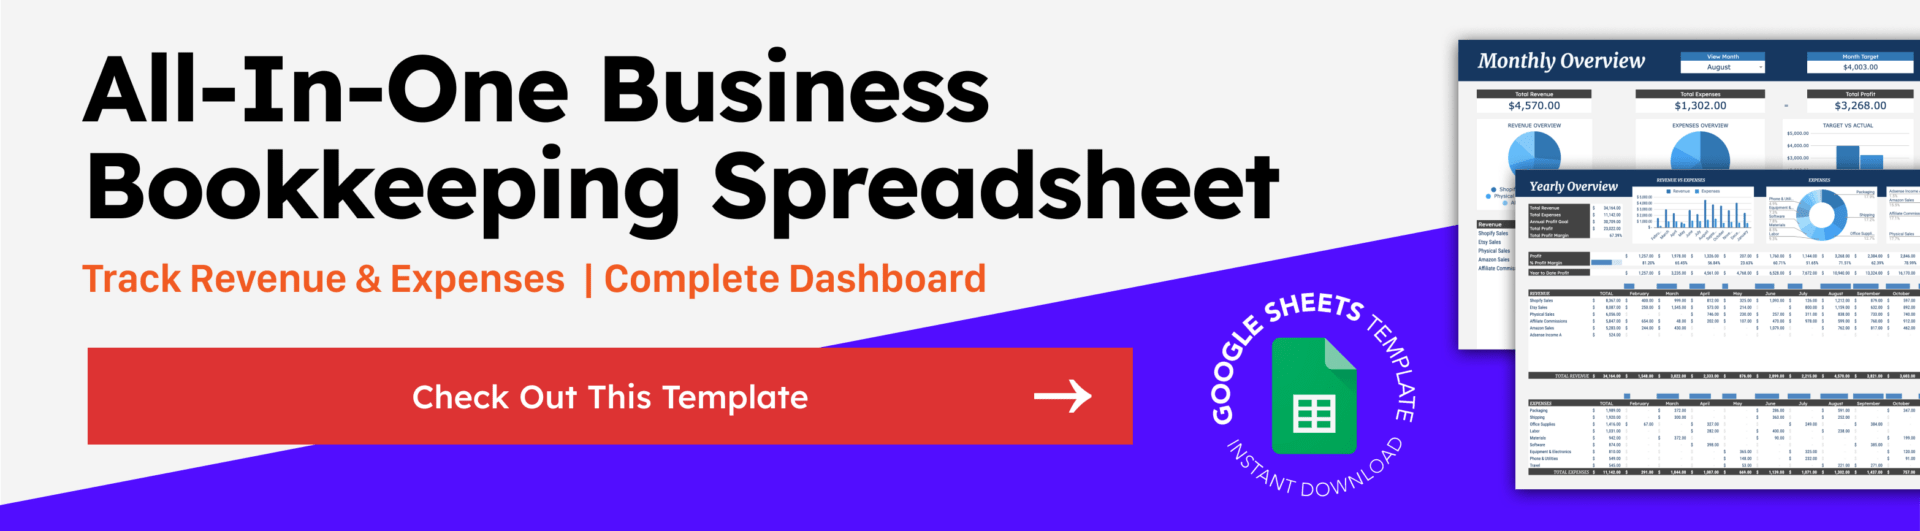 All-In-One Business Bookkeeping Spreadsheet